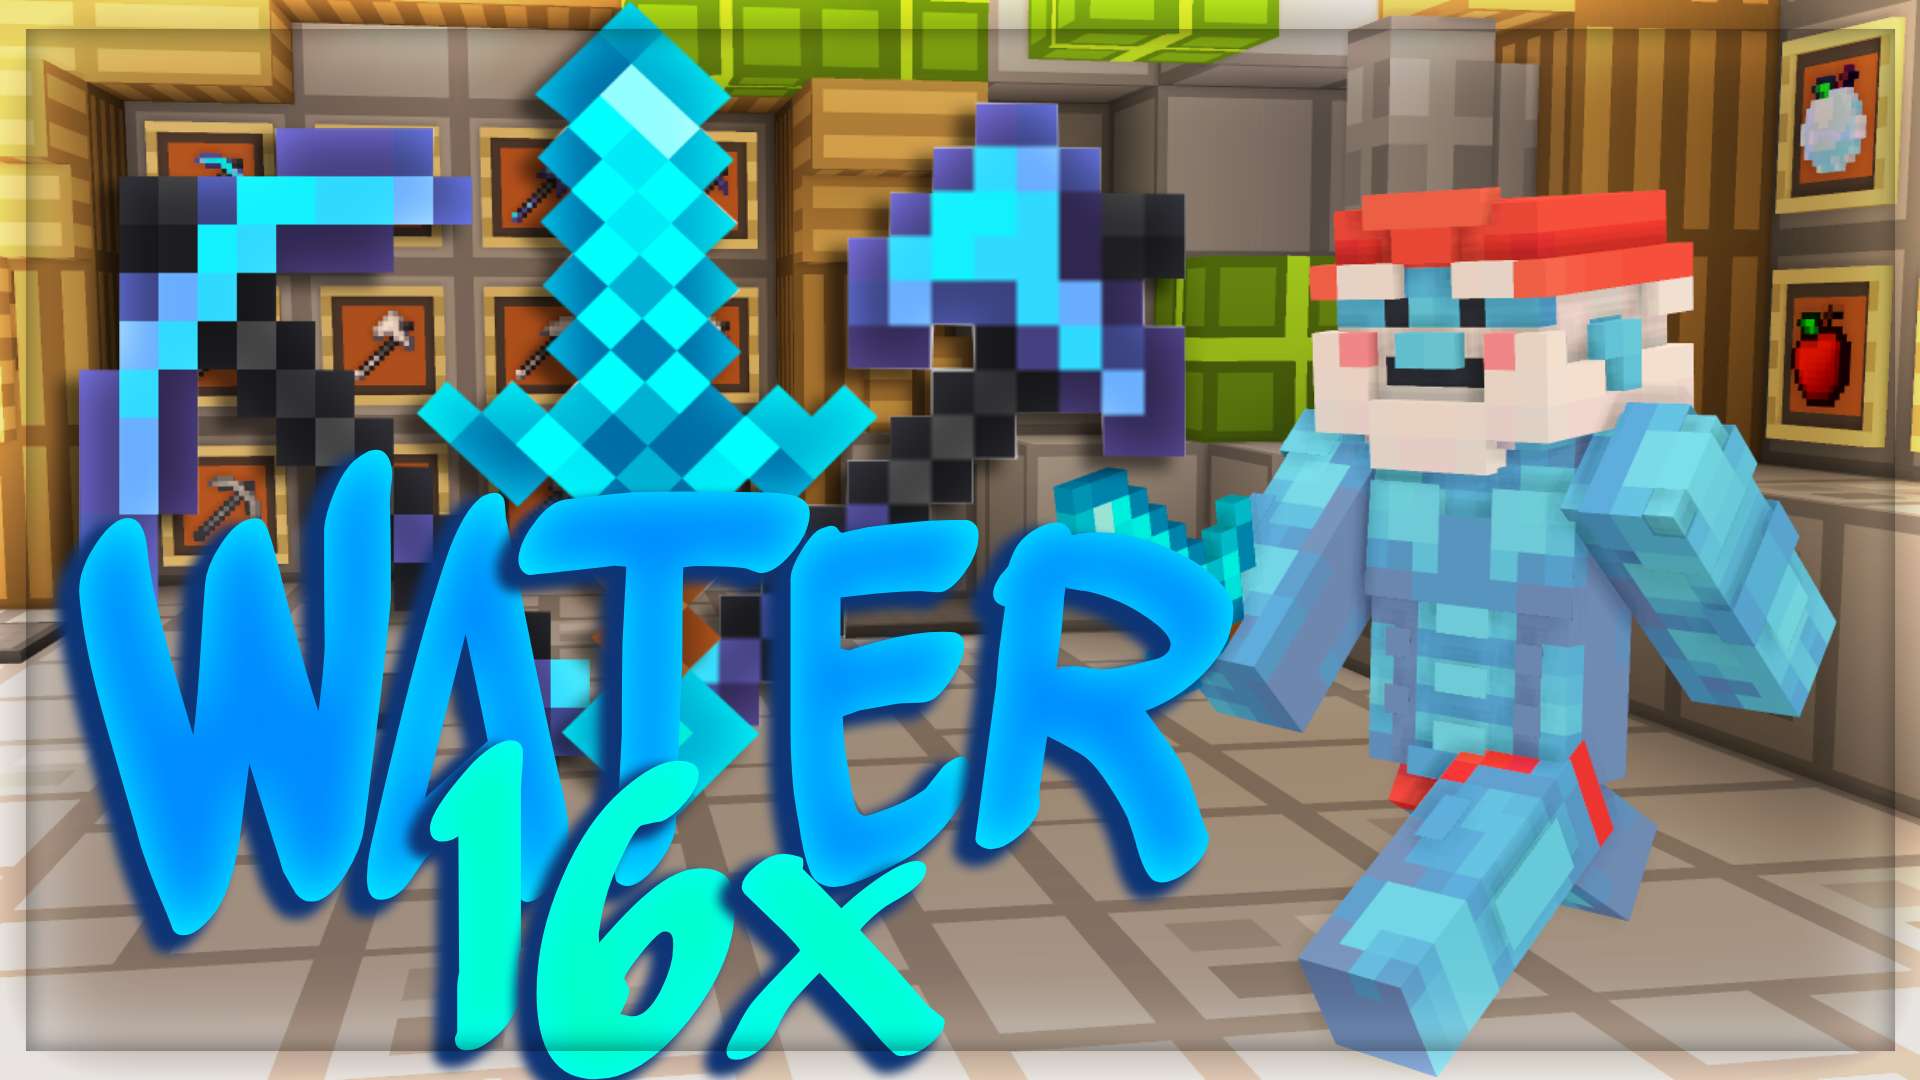 Water 16x by TamHai & MacoTaco on PvPRP